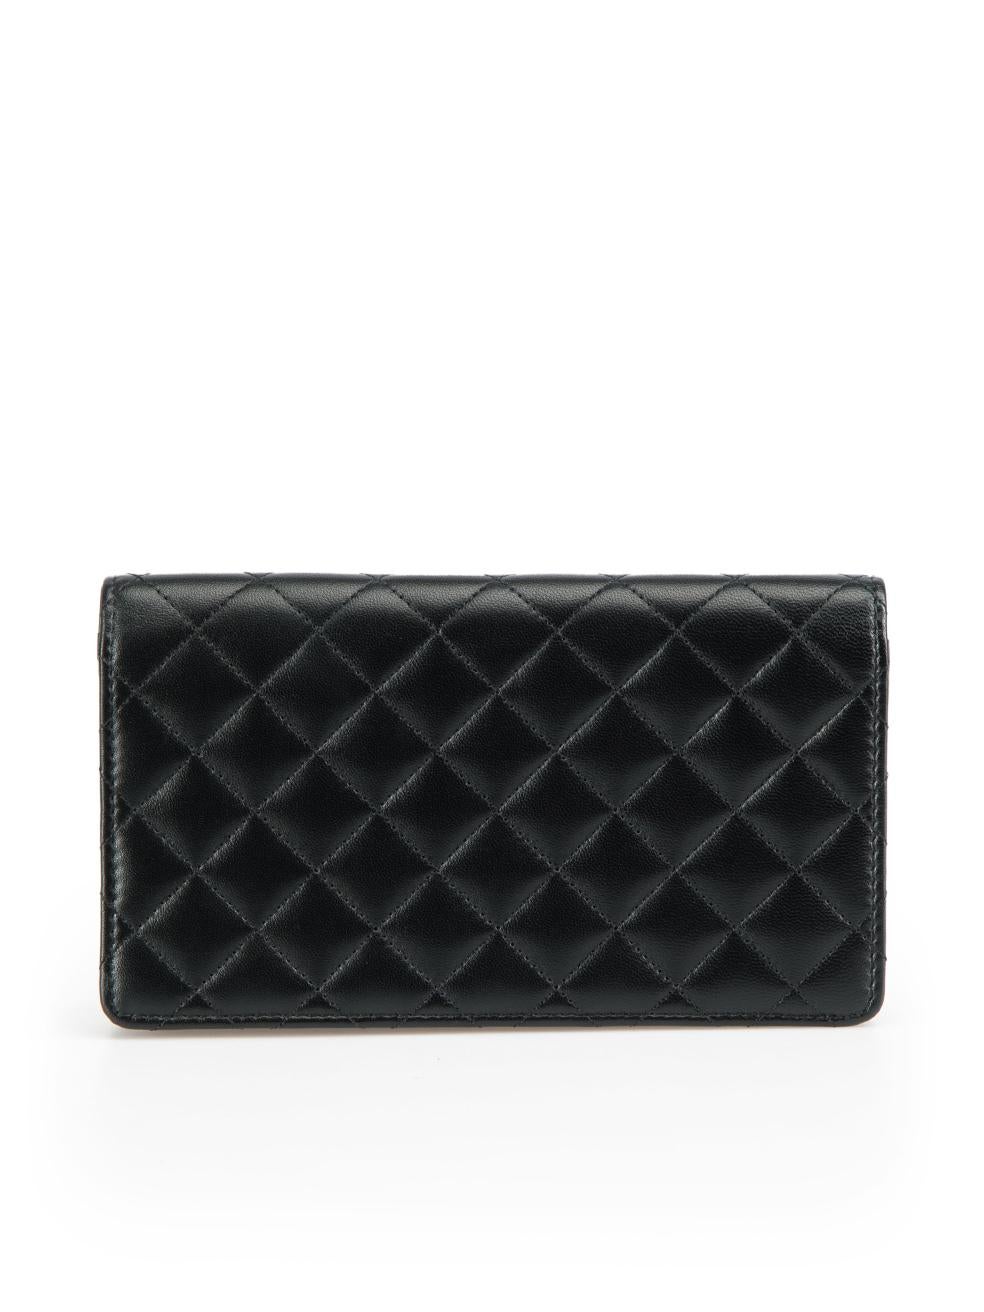 Chanel Black Leather CC Quilted Bilfold Wallet In Excellent Condition For Sale In London, GB